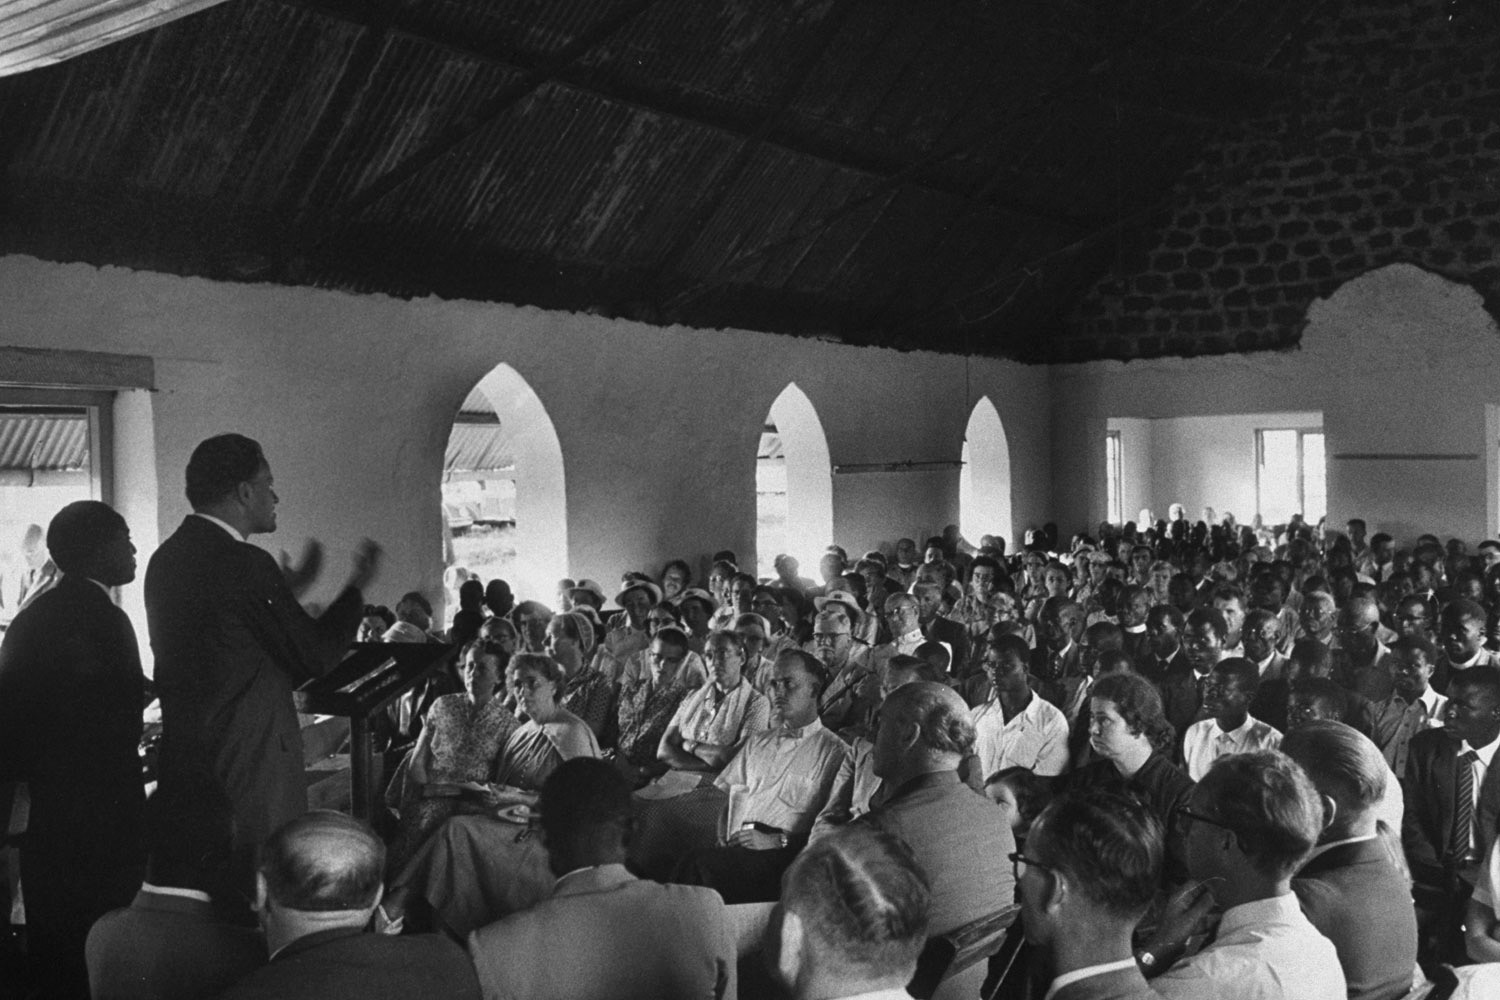 Graham addresses African religious leaders and Salvation Army members in Zimbabwe. He consistently refused to visit South Africa under Apartheid until its government finally allowed desegregated audiences.